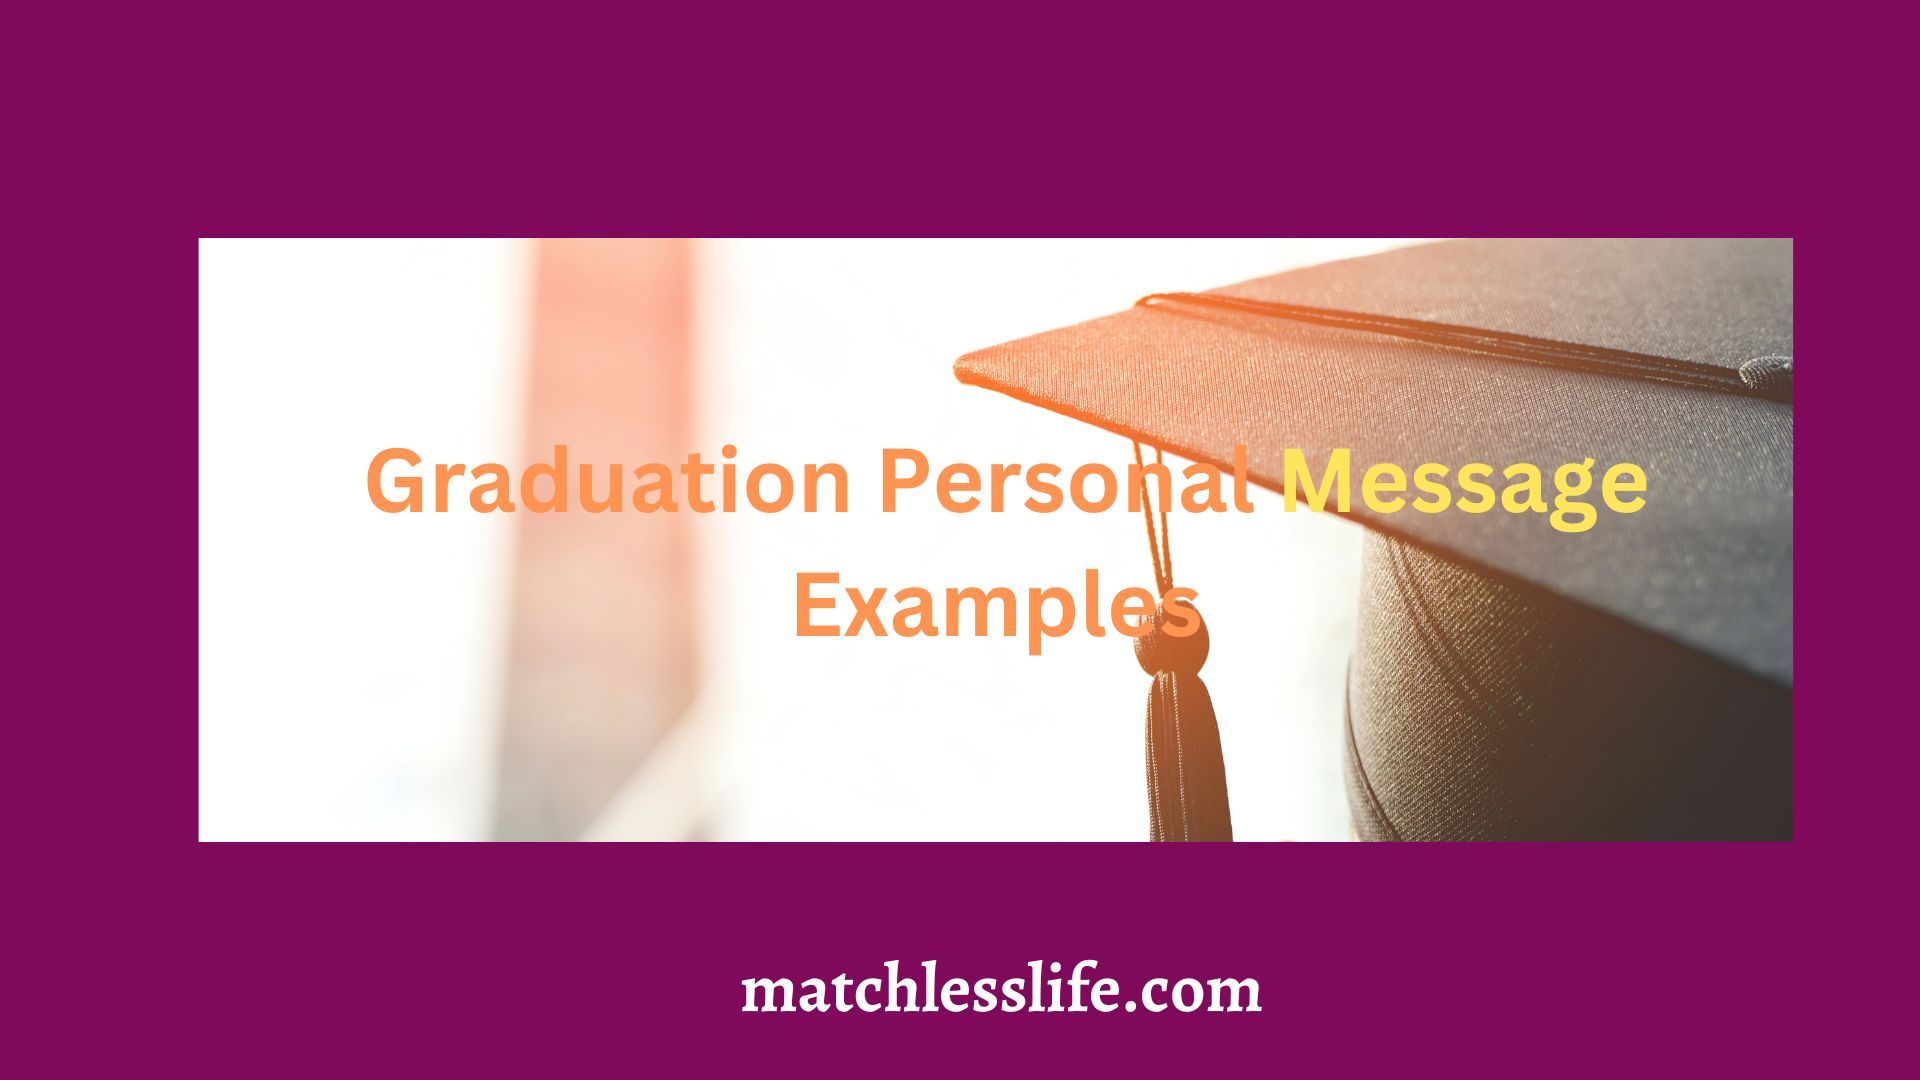 Graduation Personal Message Examples